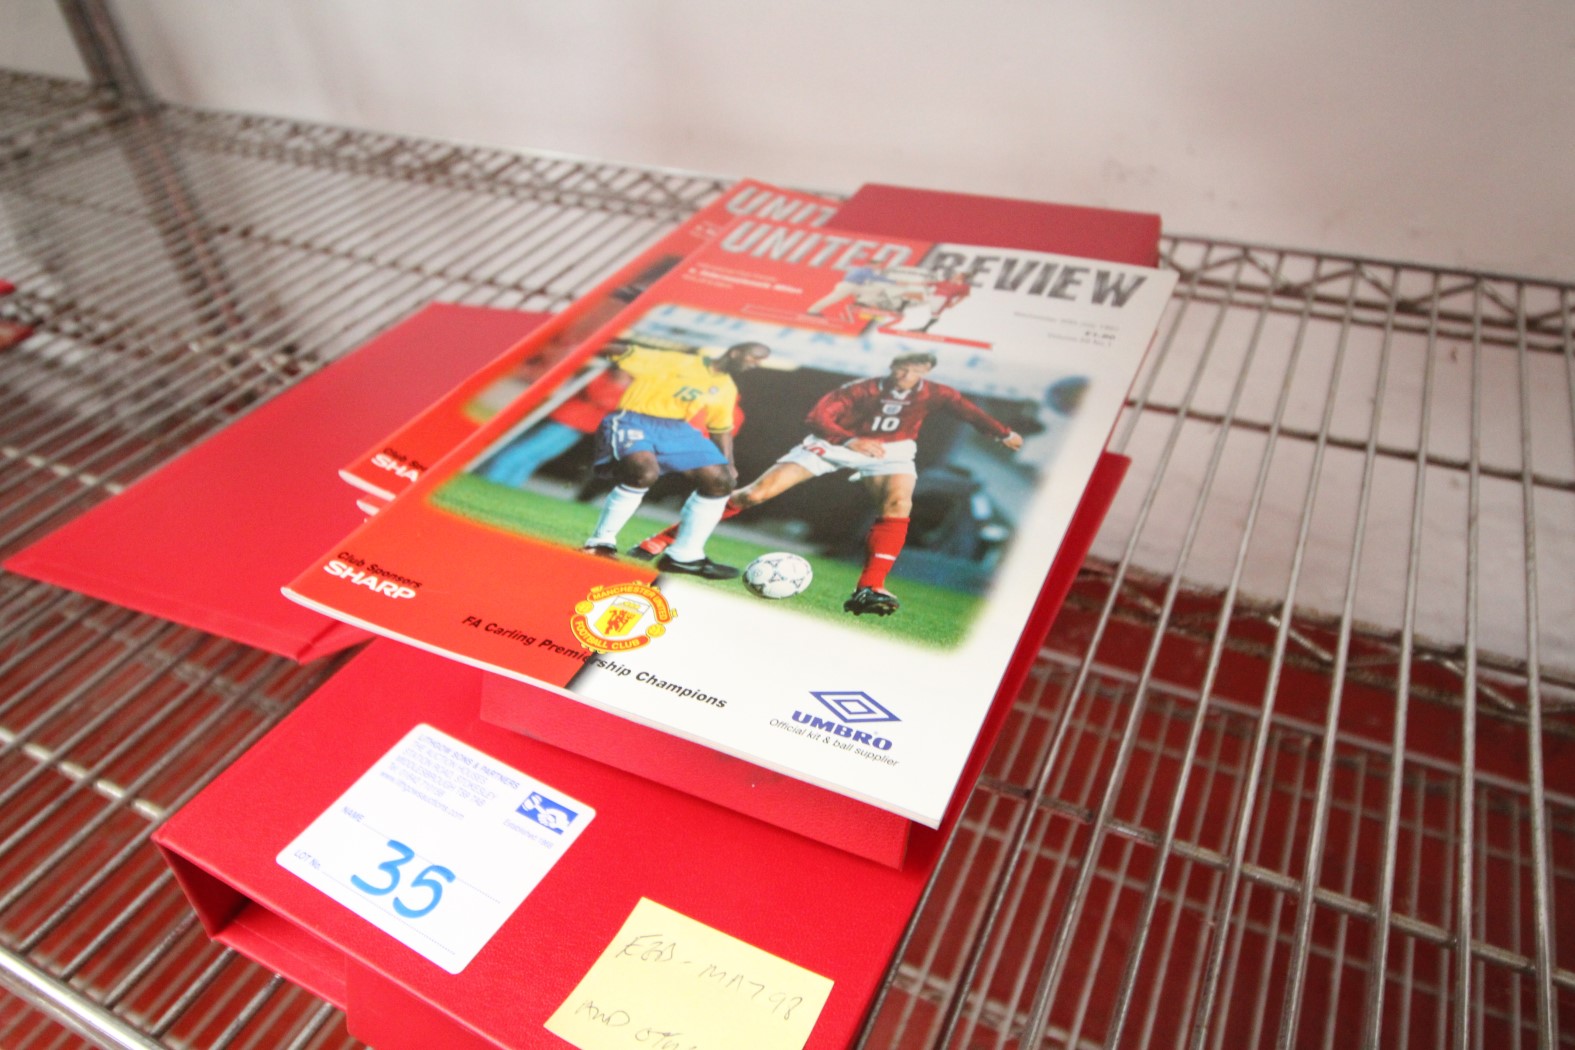 2x RED MANCHESTER UNITED MATCH DAY PROGRAM FOLDERS AND CONTENTS OF PROGRAMS, SEASON 1997 / 98 - Image 2 of 2